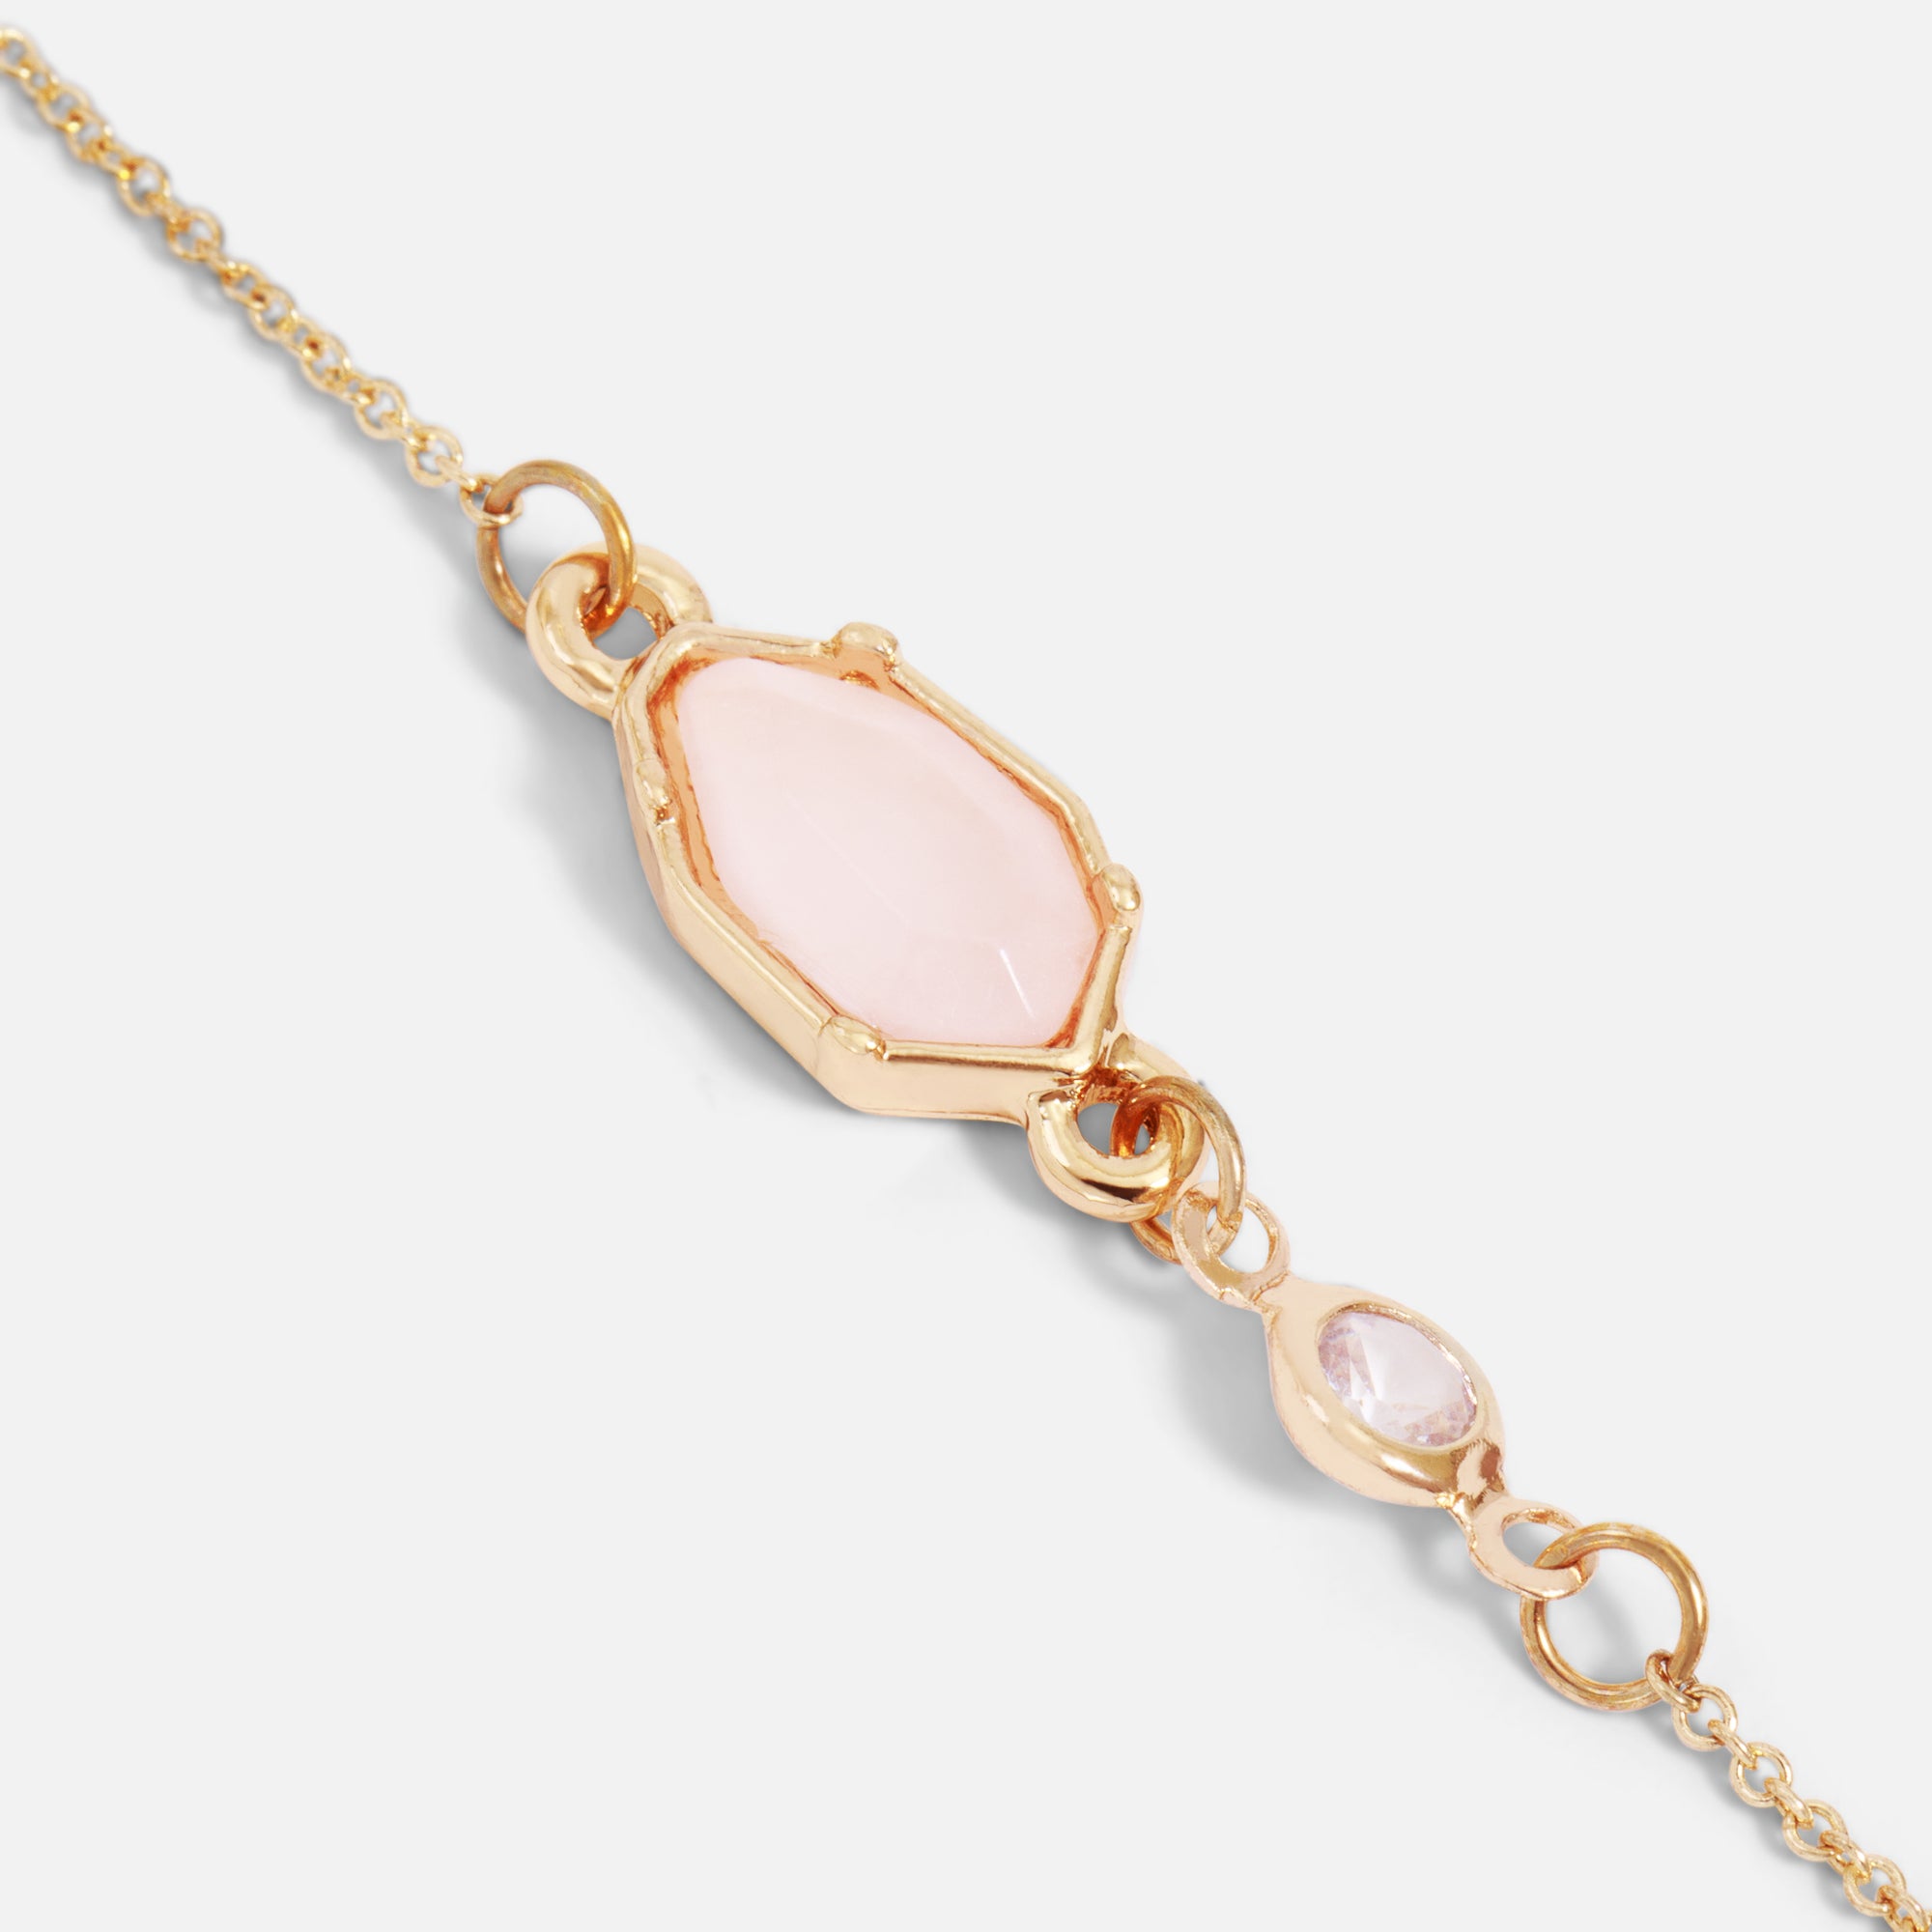 Golden bracelet with pale pink and sparkling stone